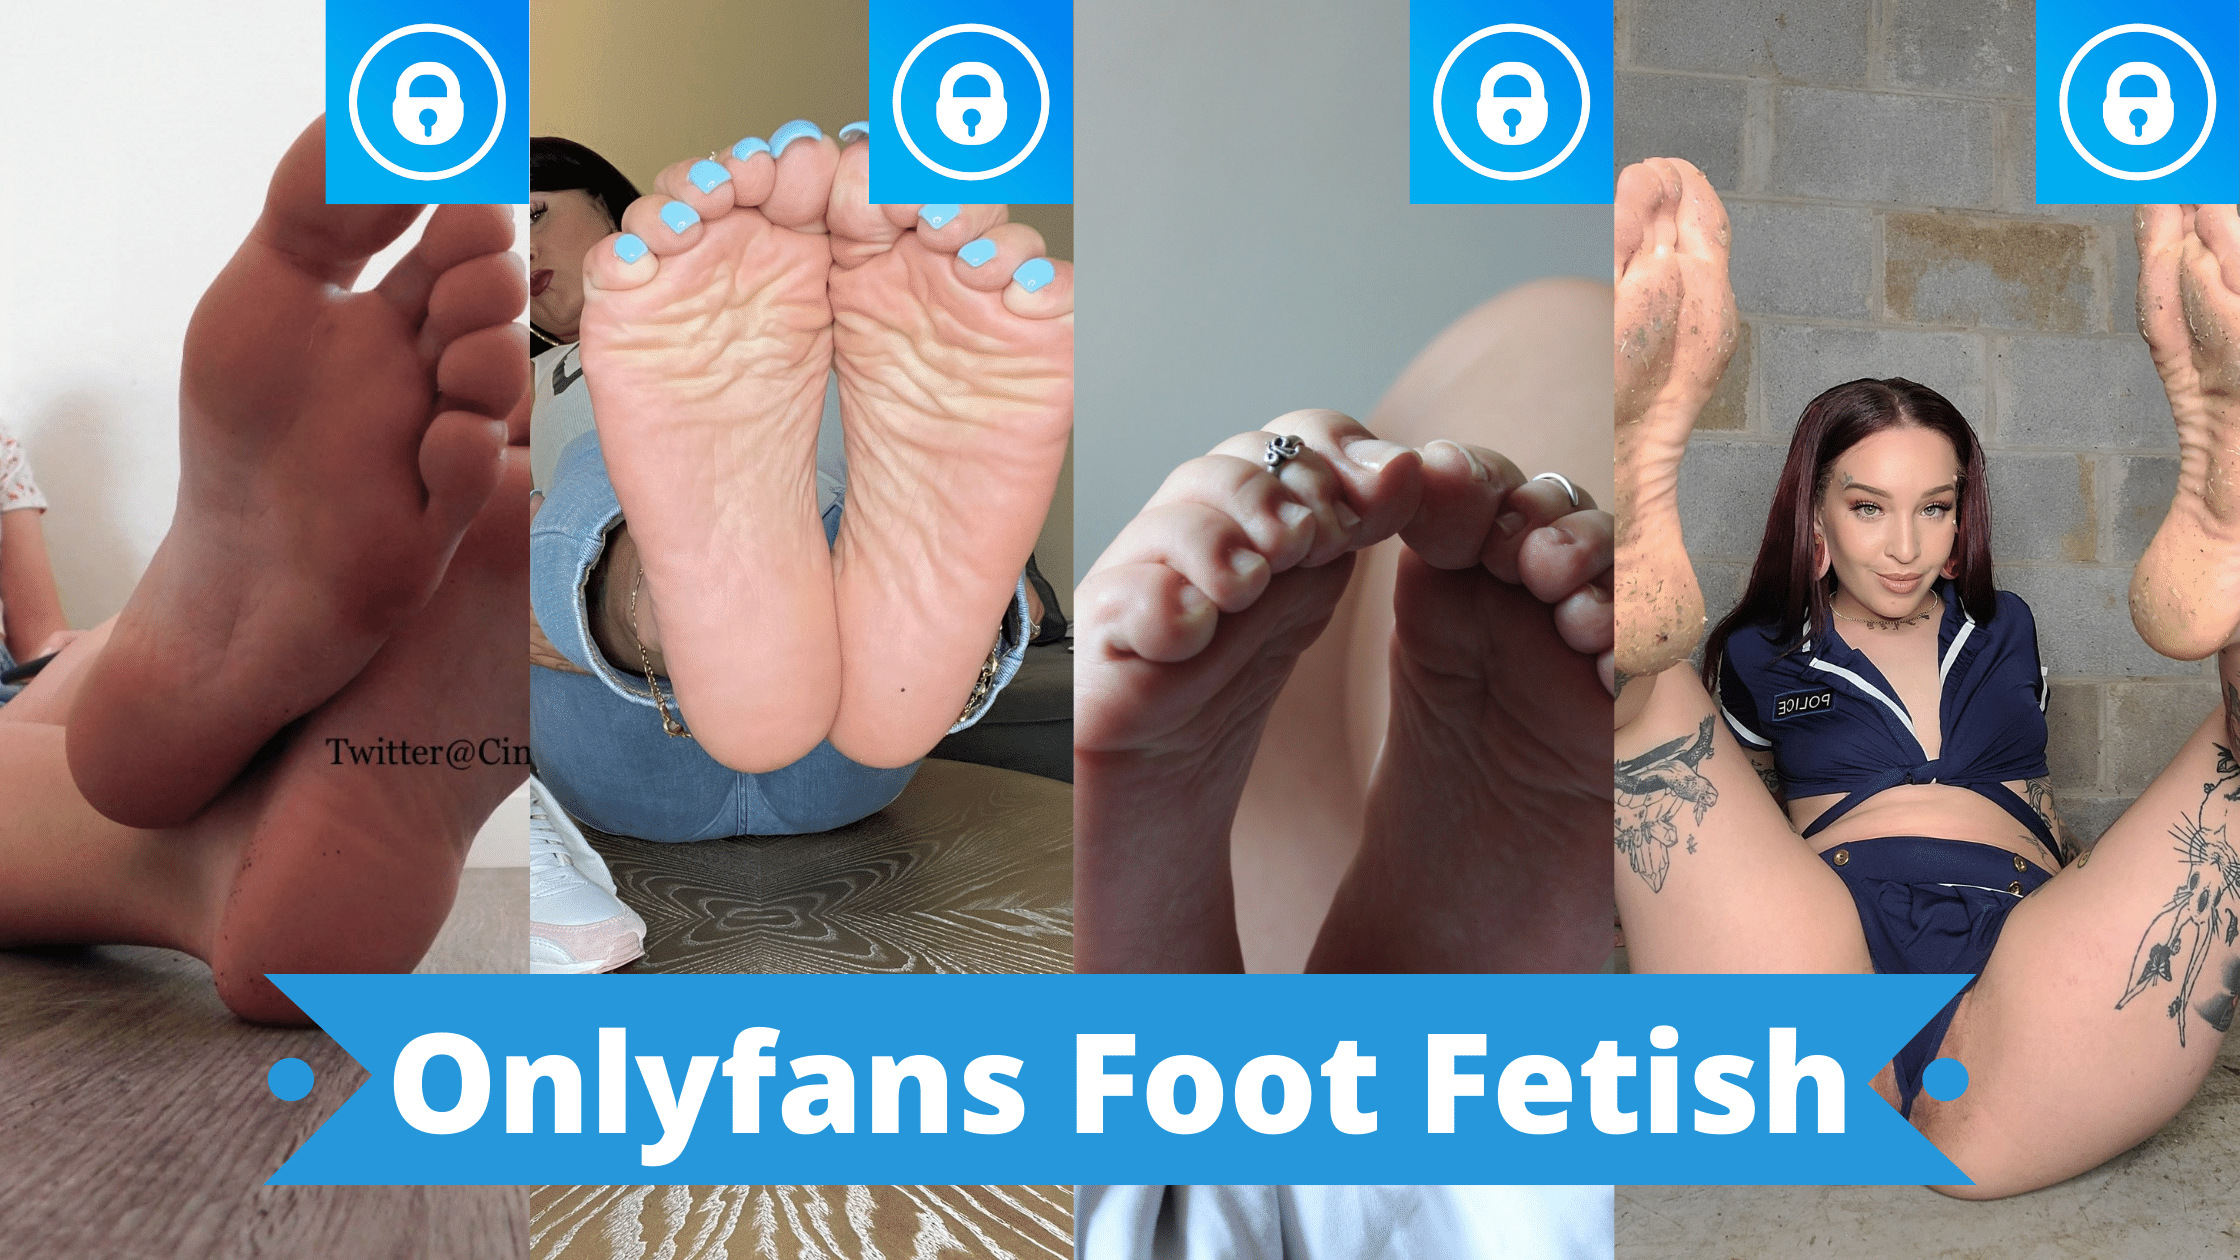 How to make onlyfans for feet pics